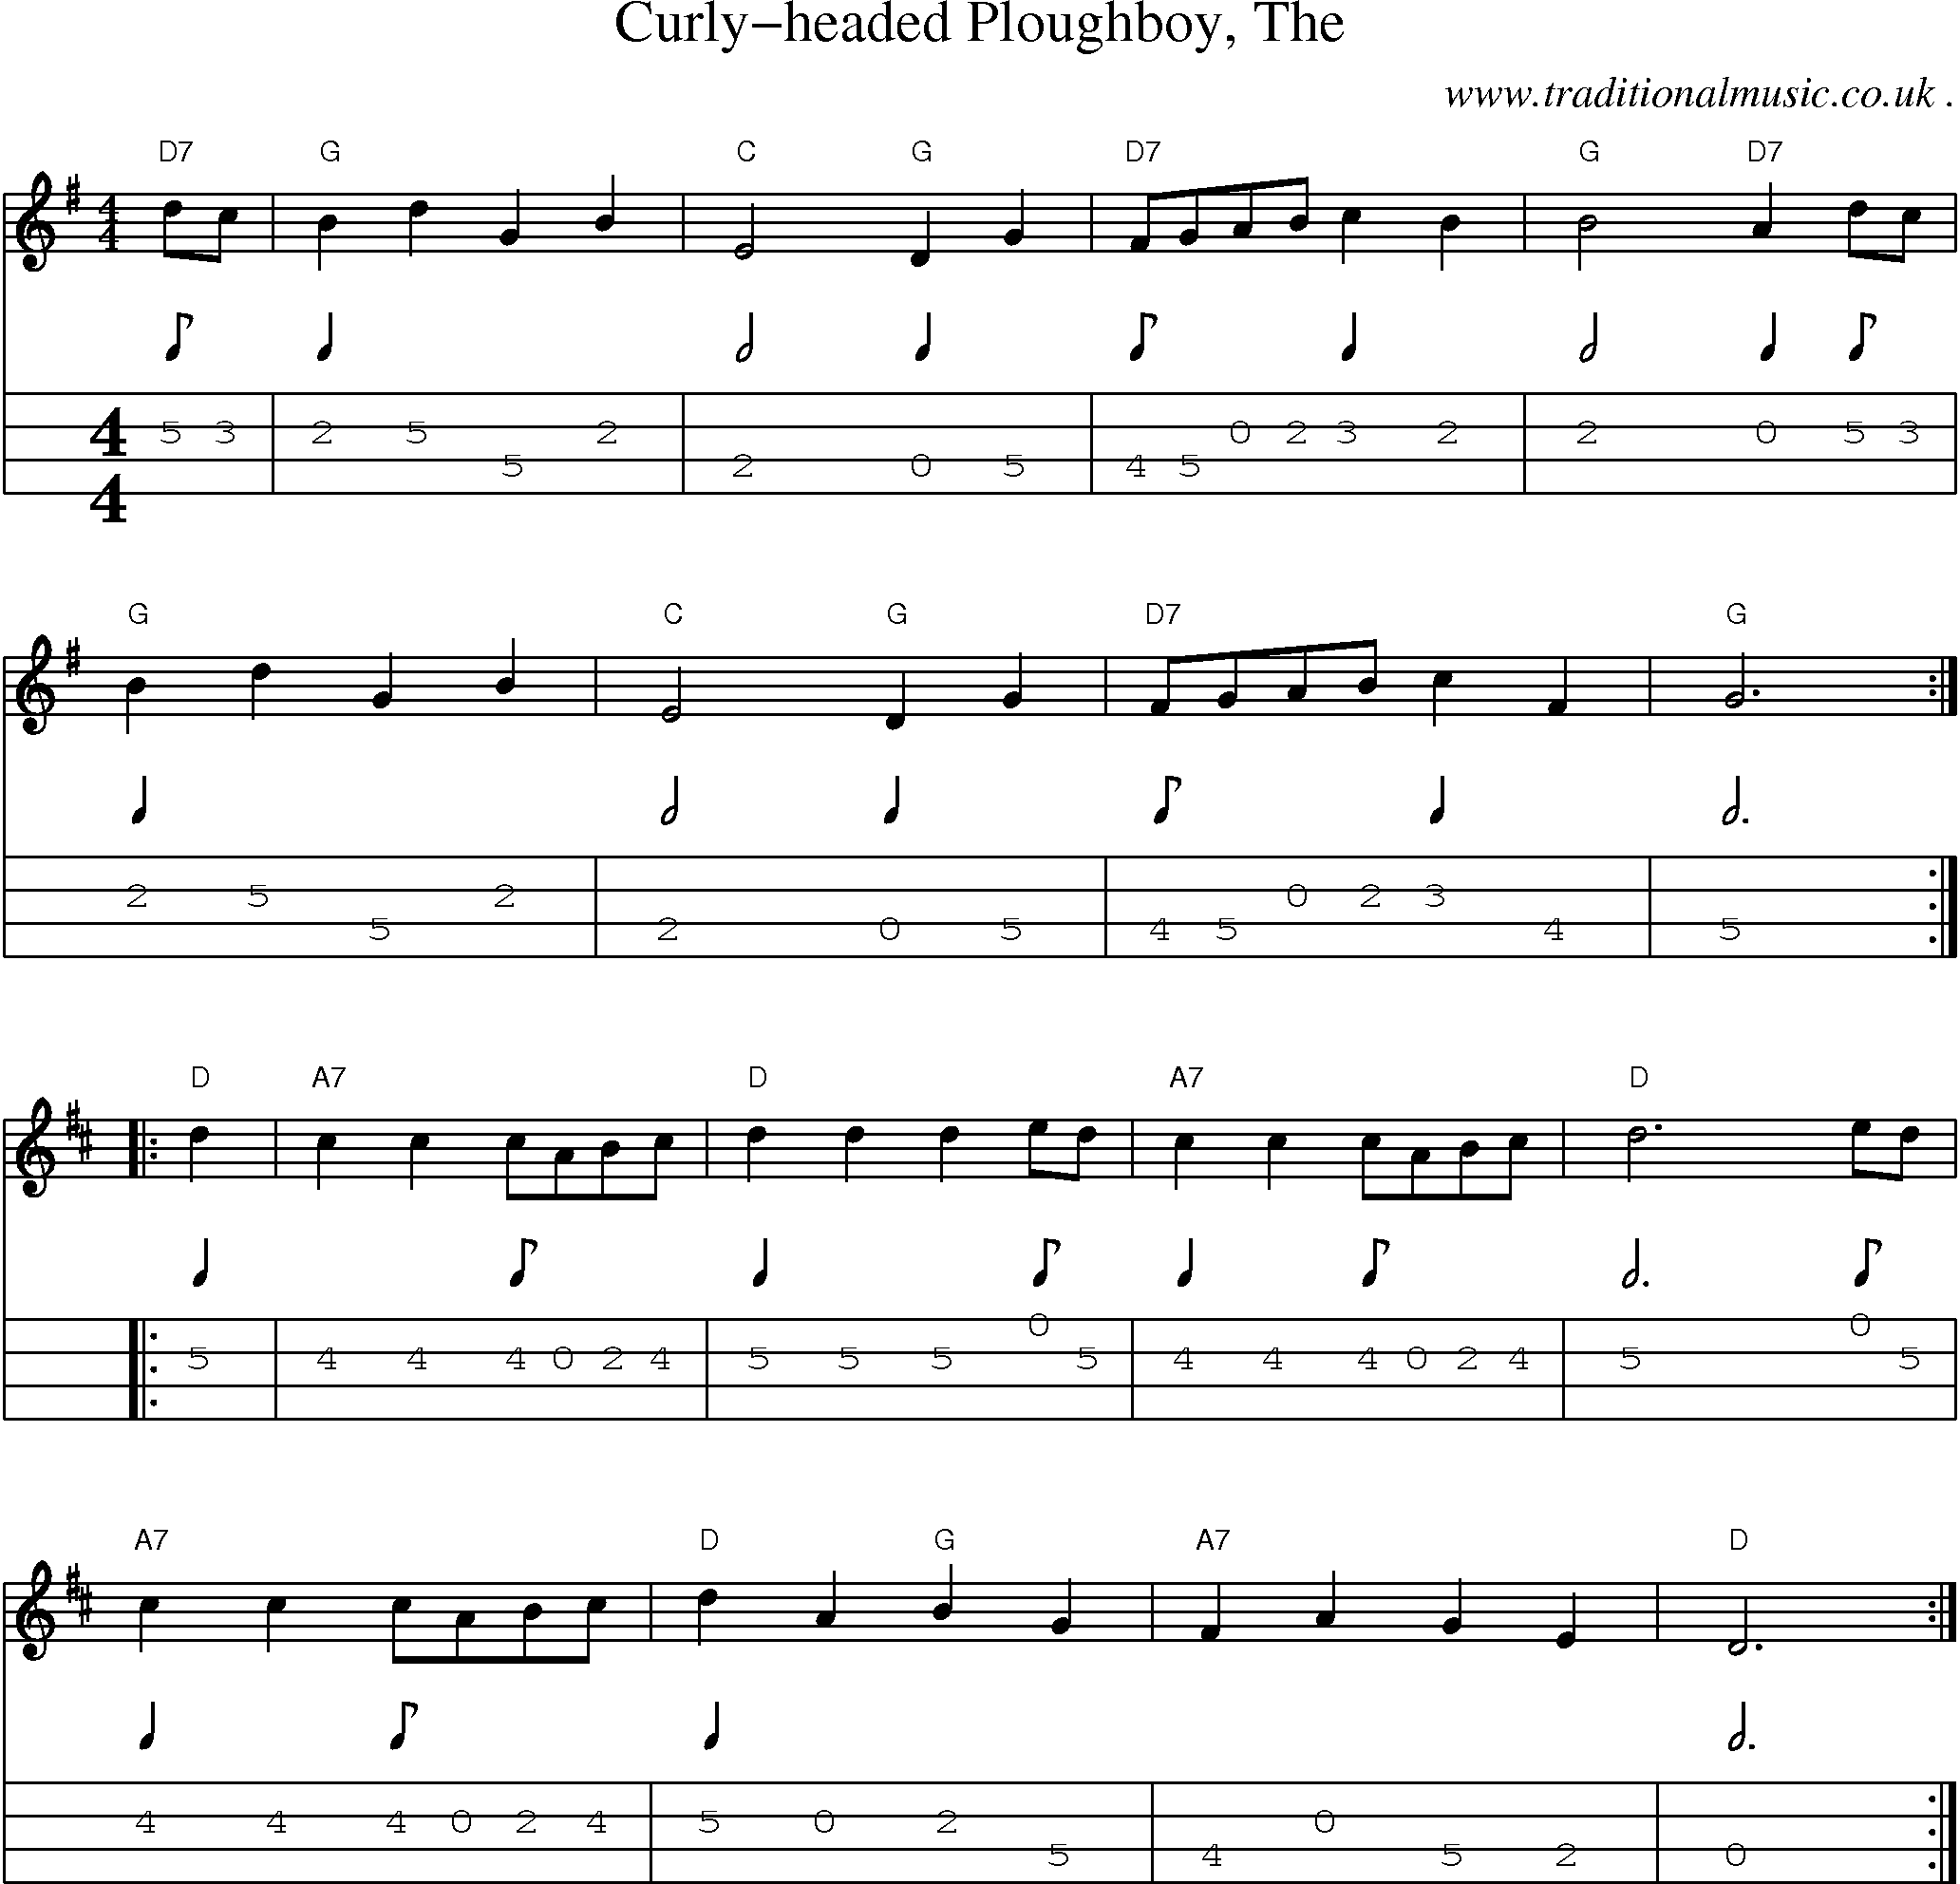 Music Score and Guitar Tabs for Curly-headed Ploughboy The1